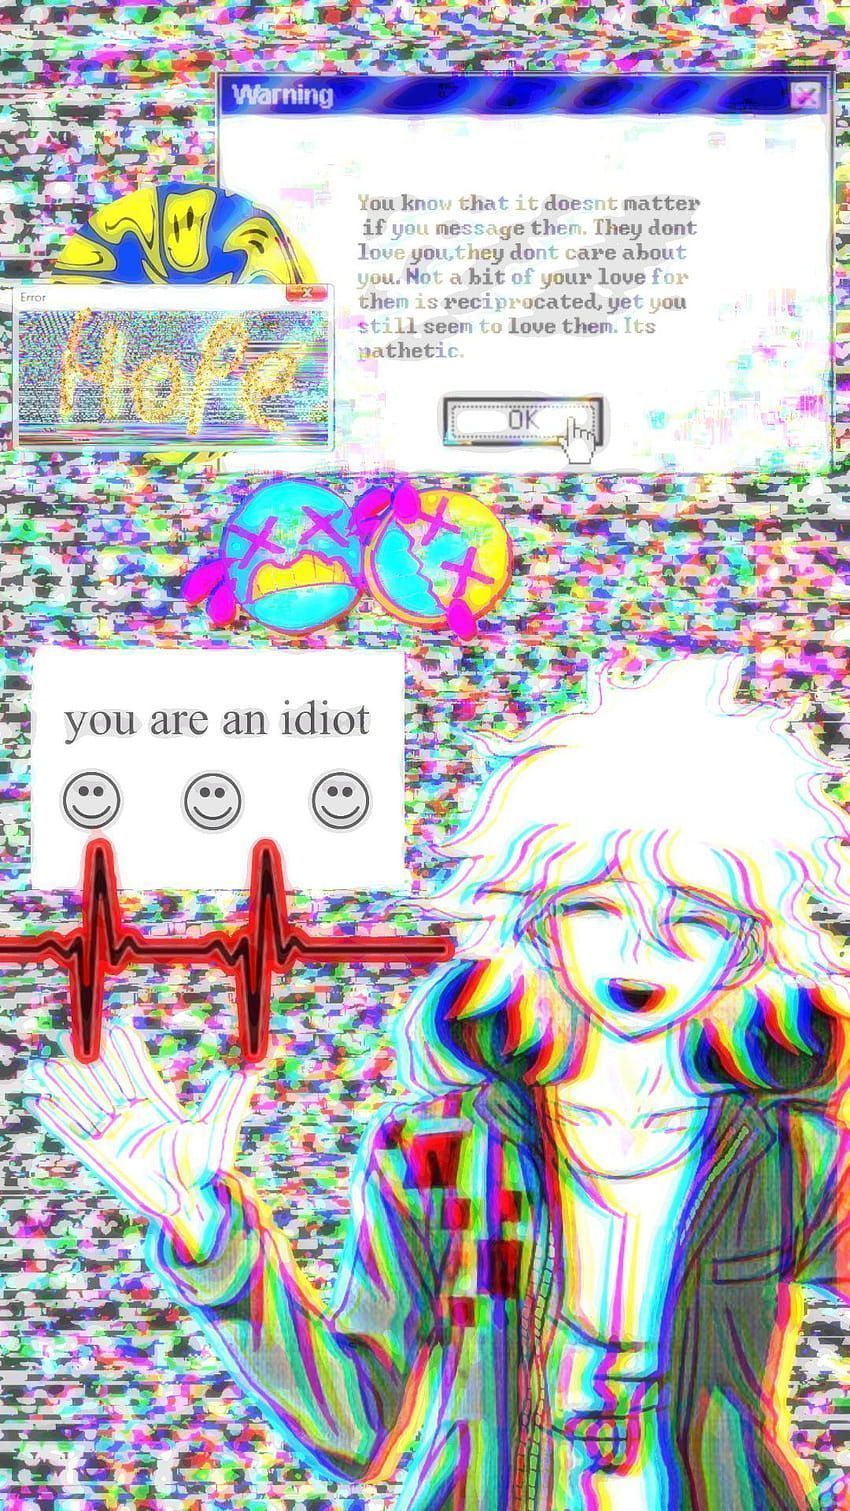 A computer screen with an image of the person - Glitchcore